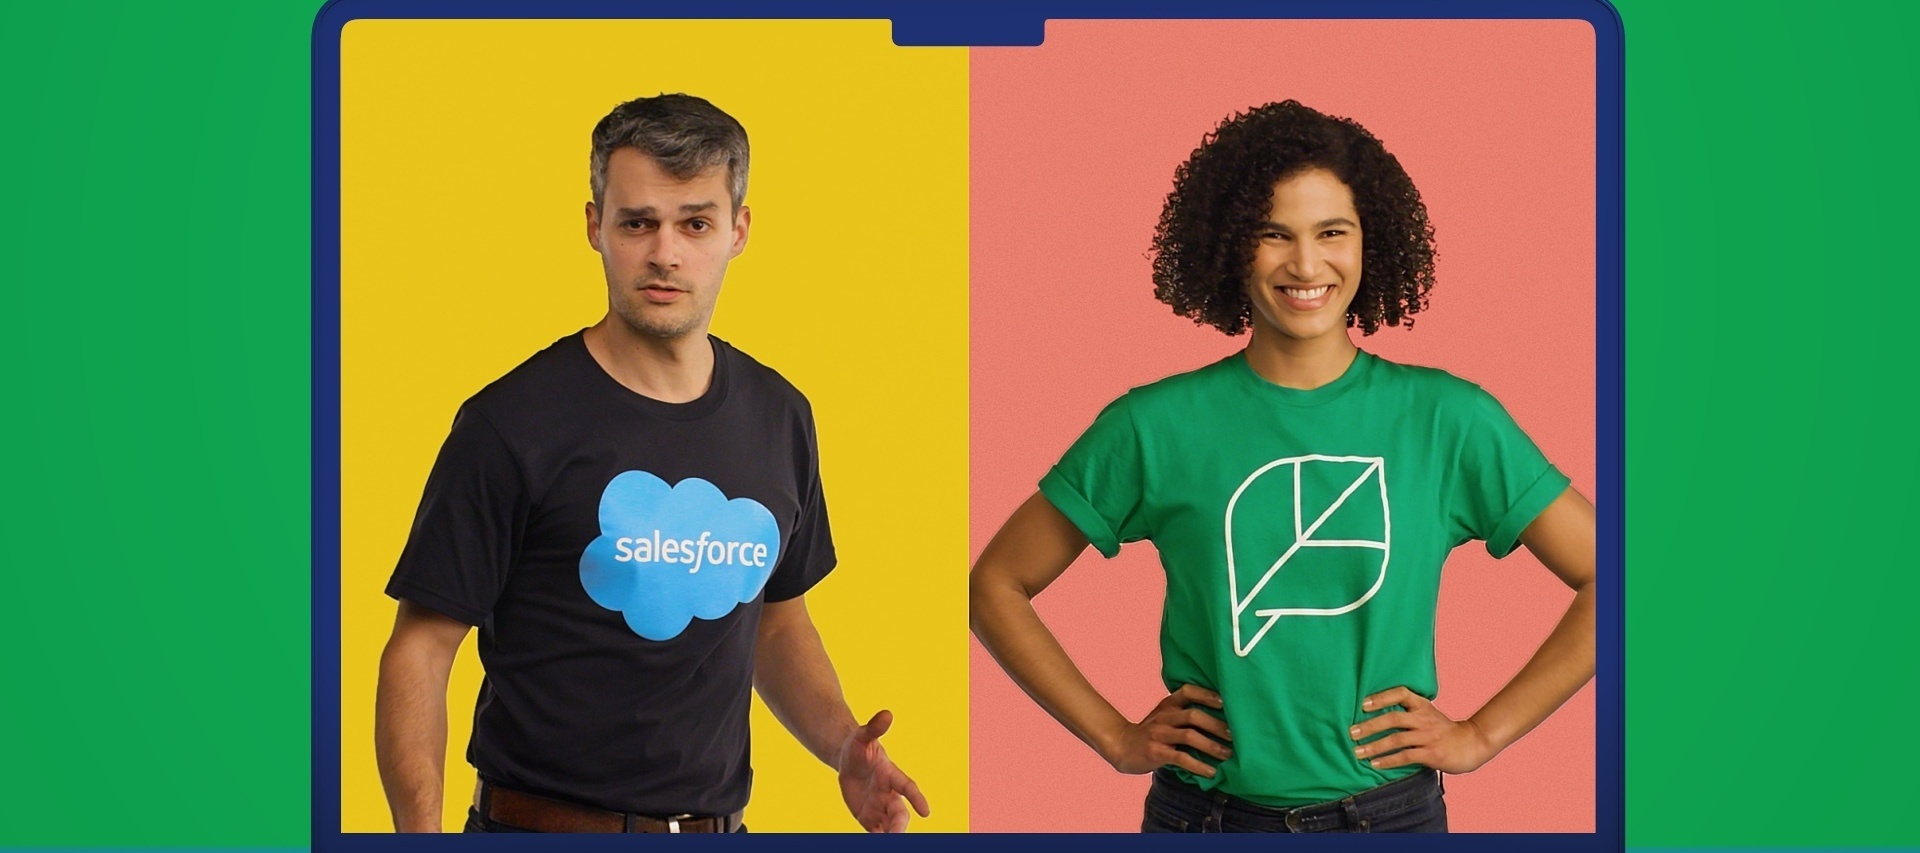 🚨New partnership alert!🚨 Salesforce and Sprout Social